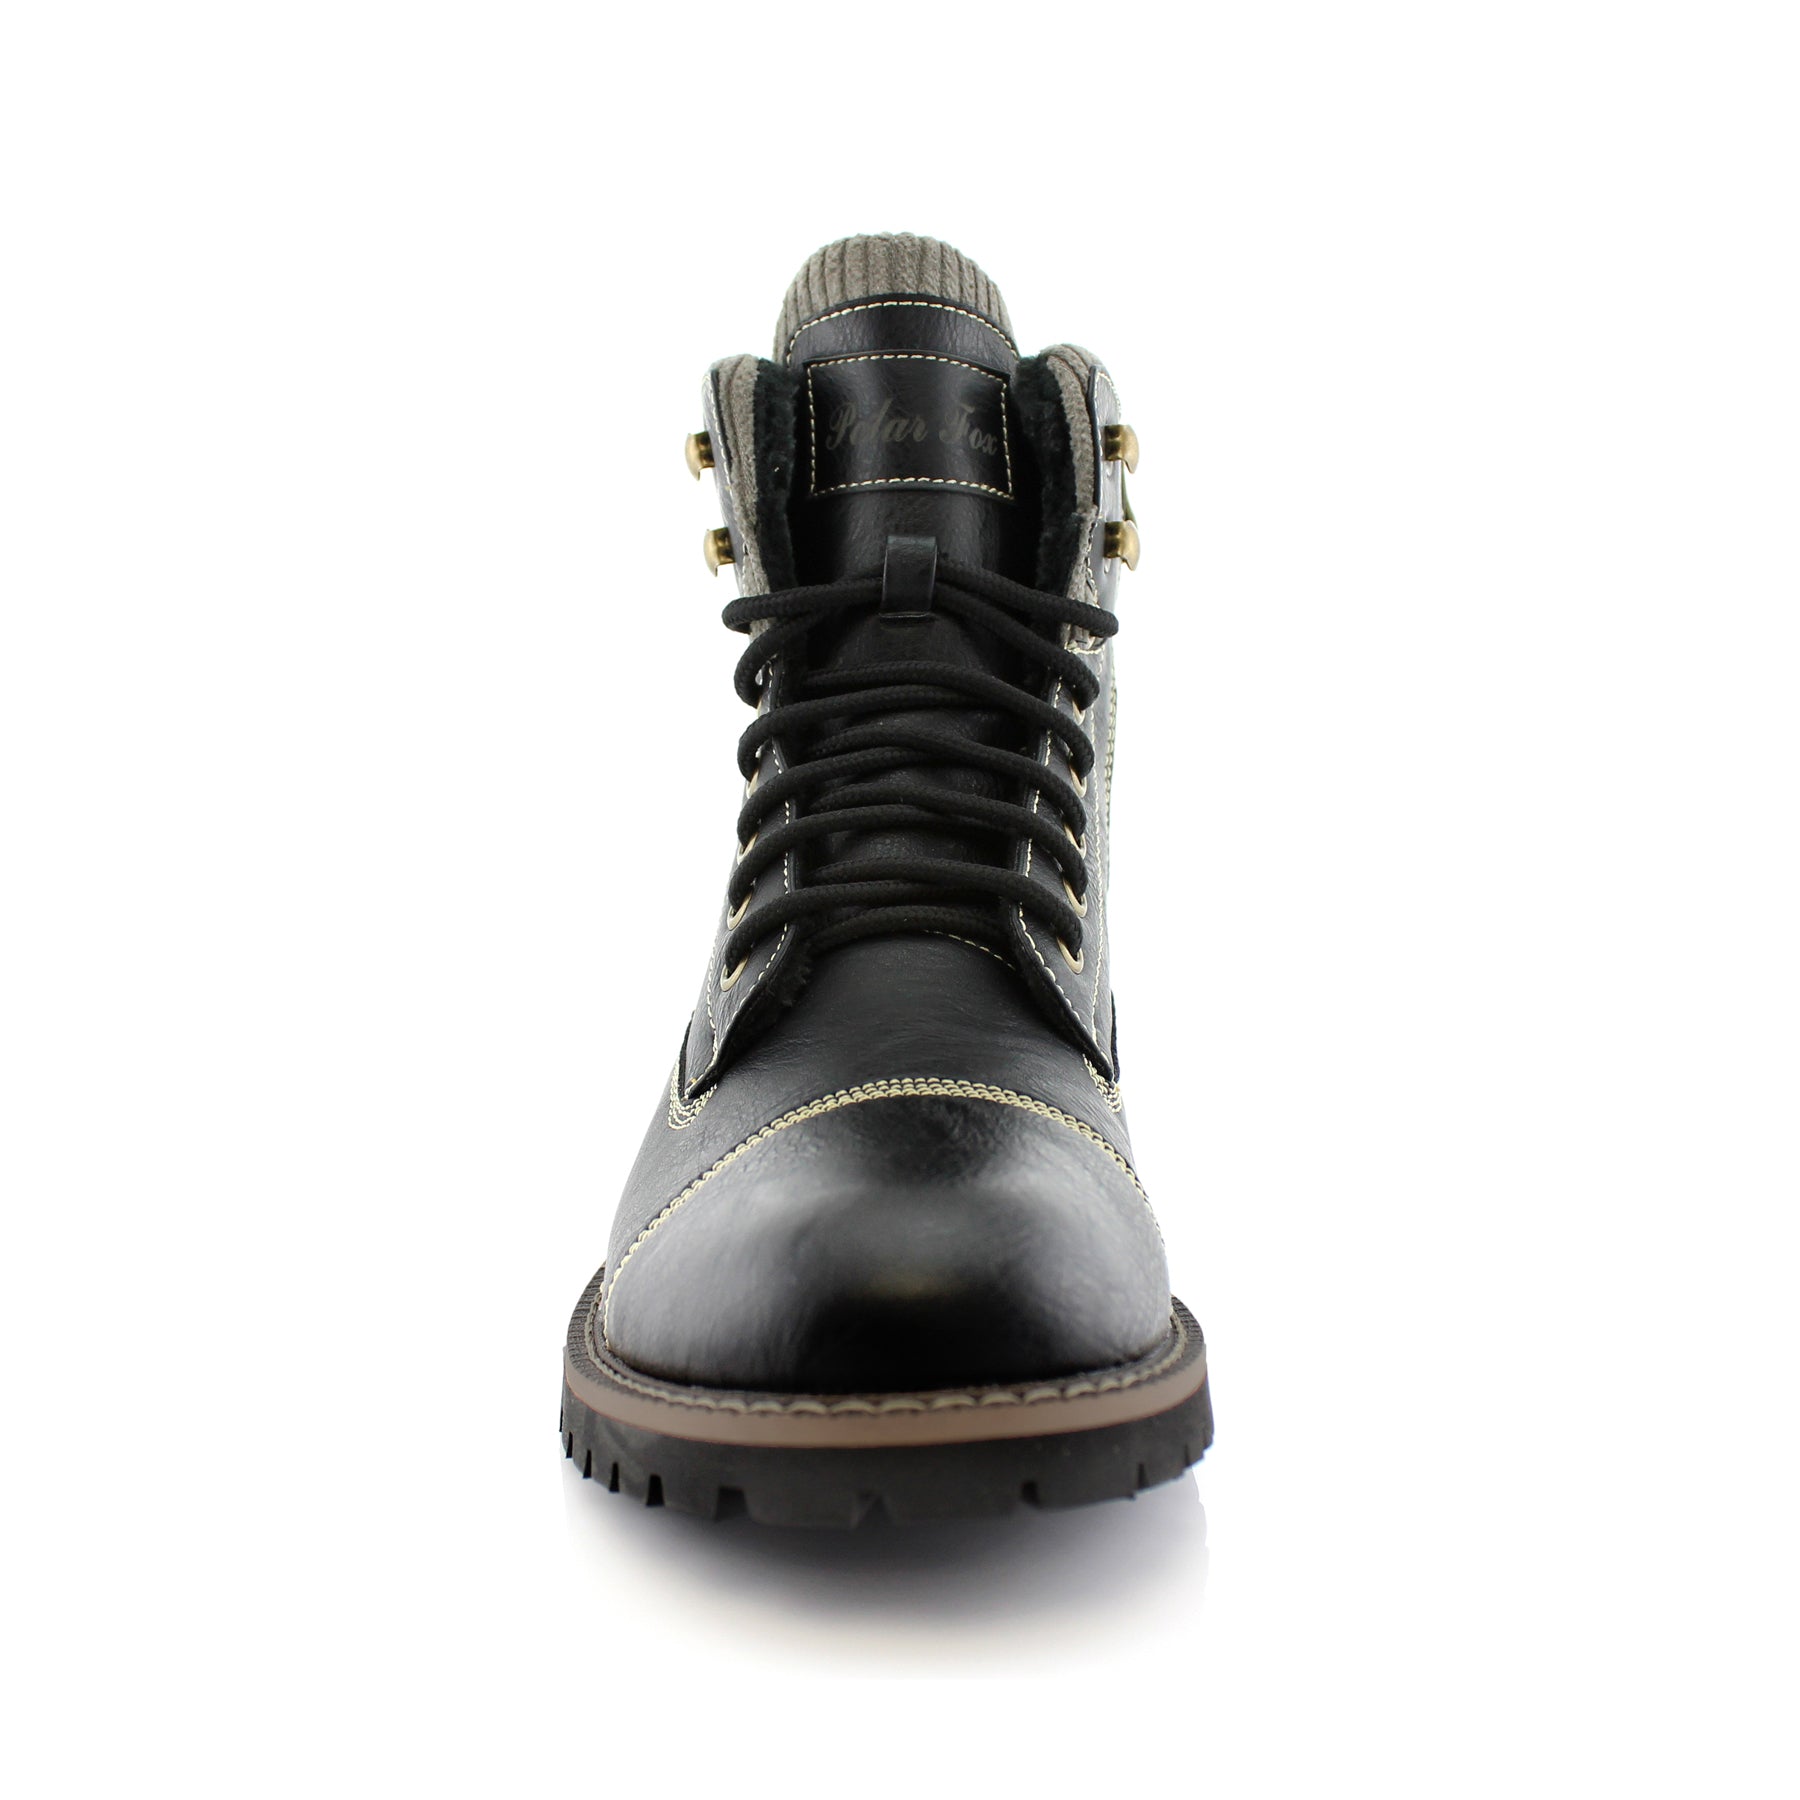 Combat Motorcycle Zipper Boots | Brady by Polar Fox | Conal Footwear | Front Angle View